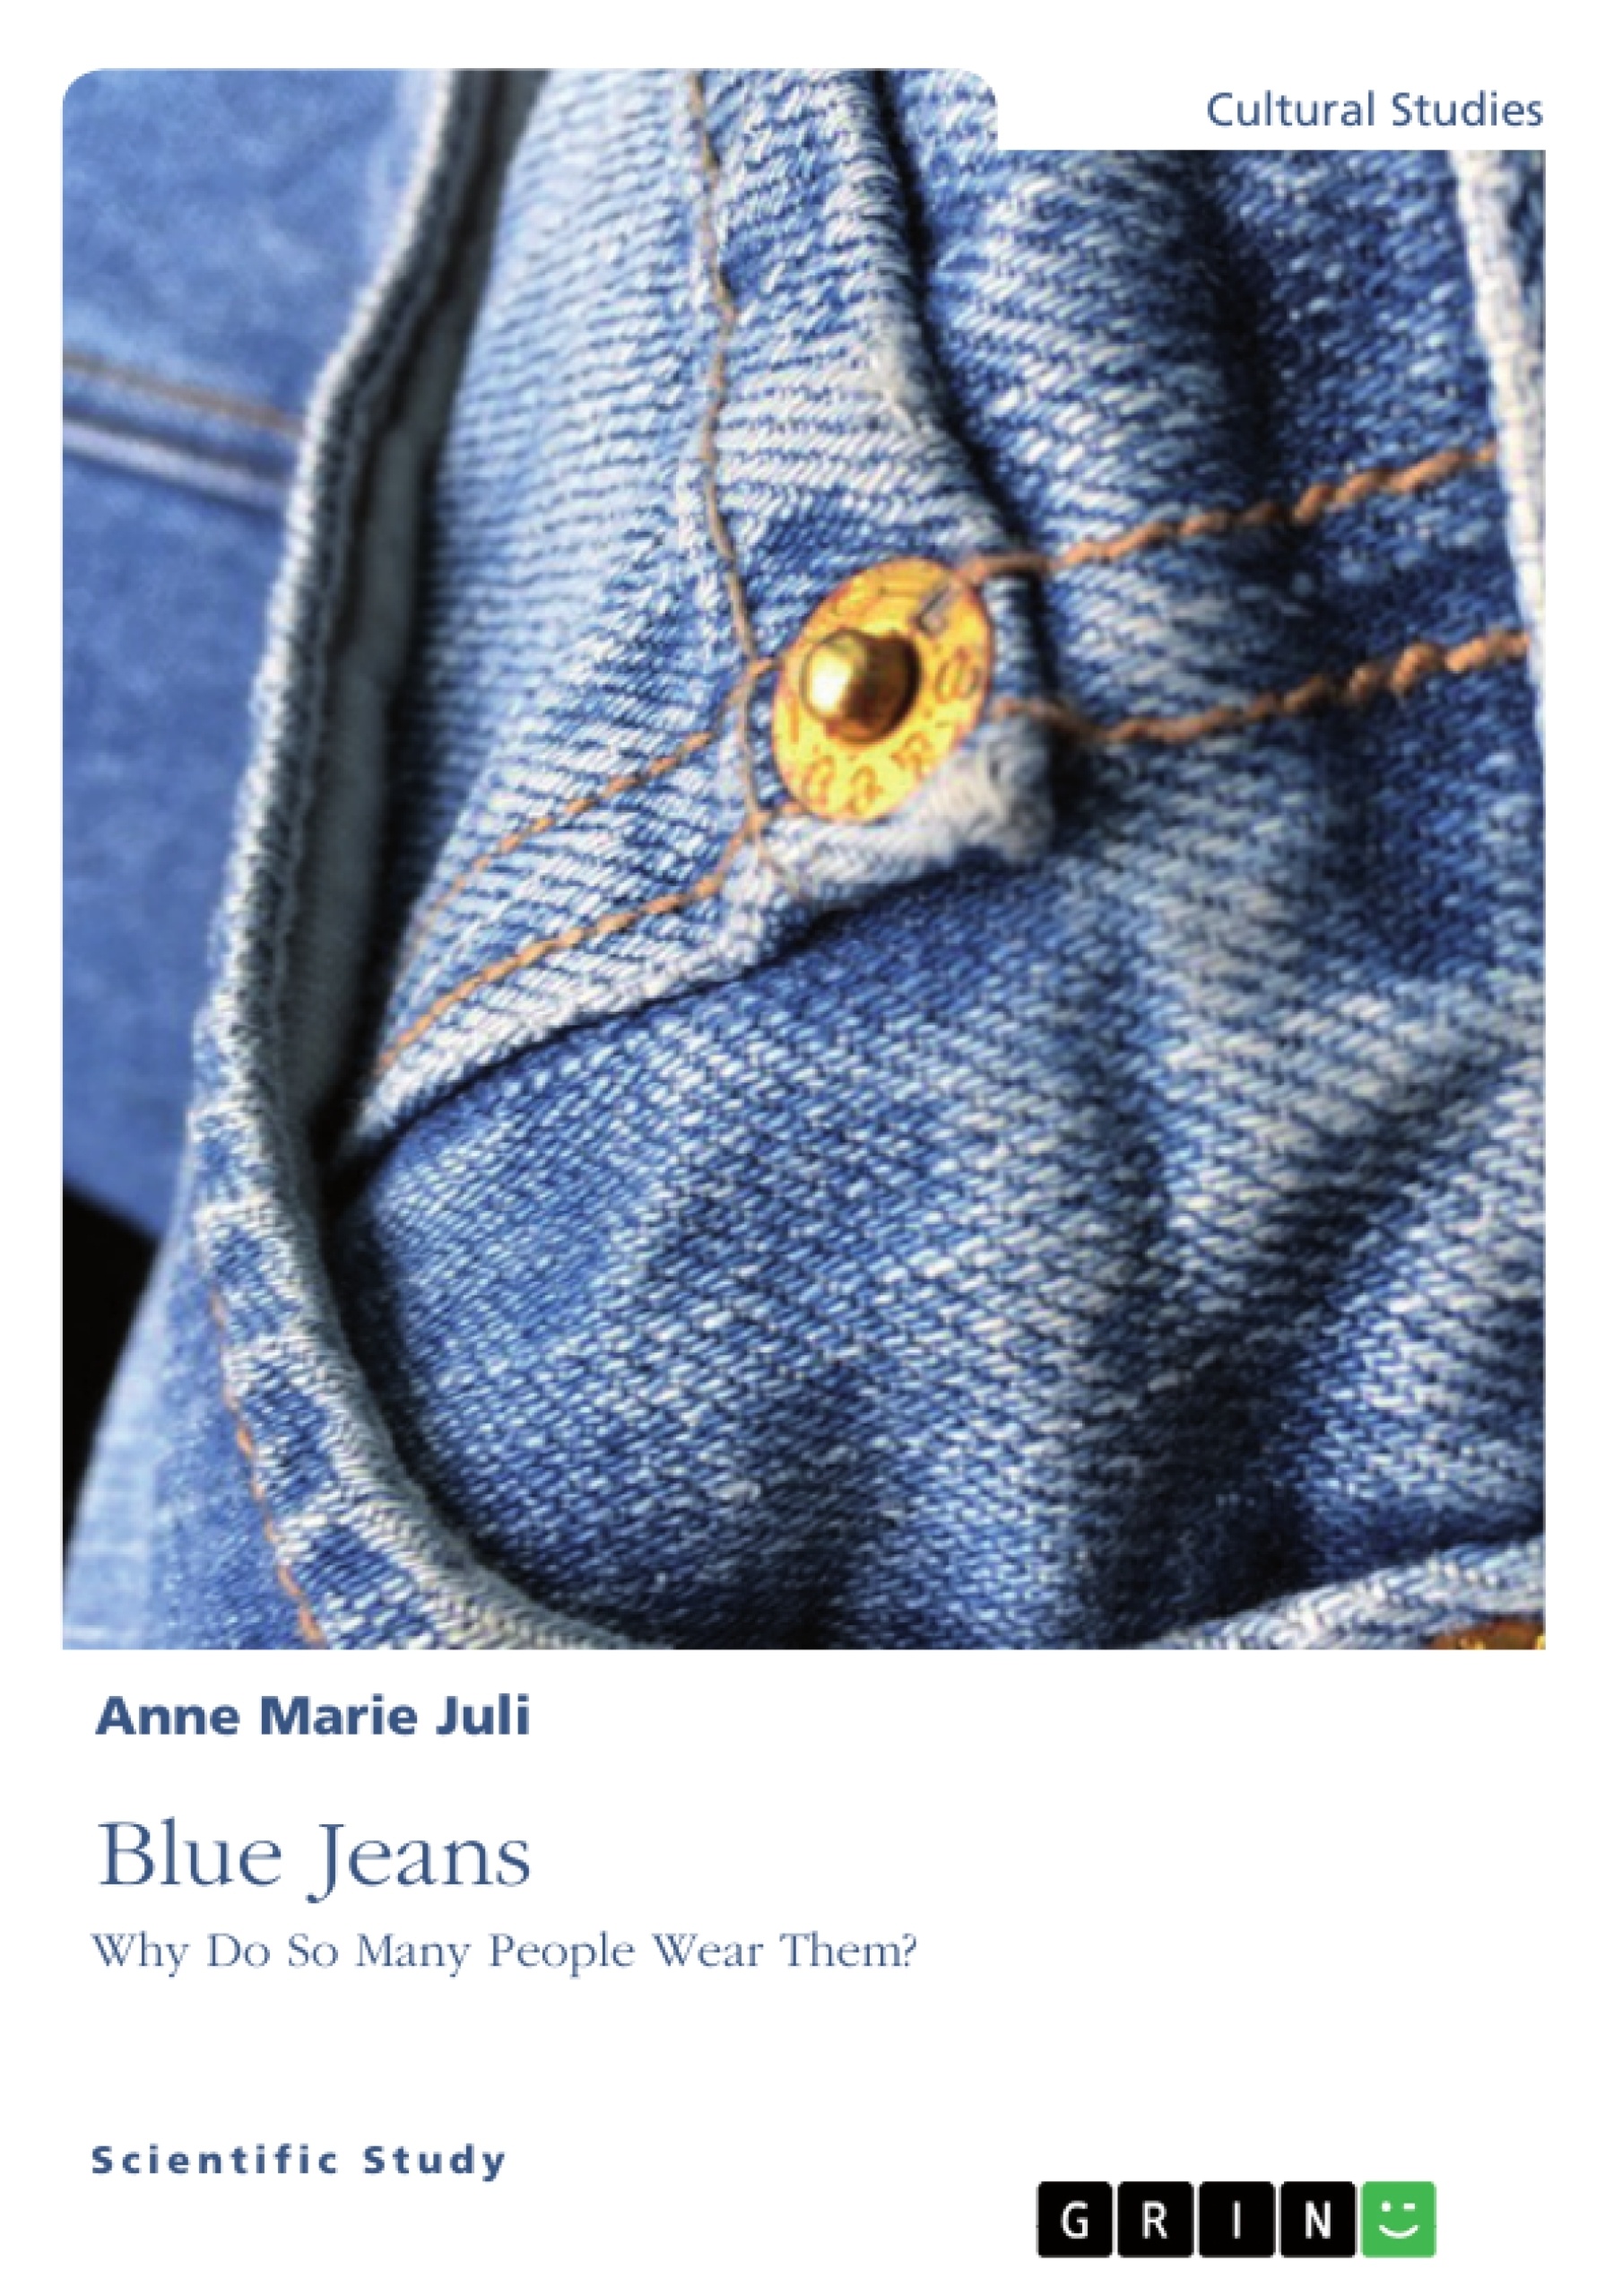 Title: Blue Jeans. Why Do So Many People Wear Them?